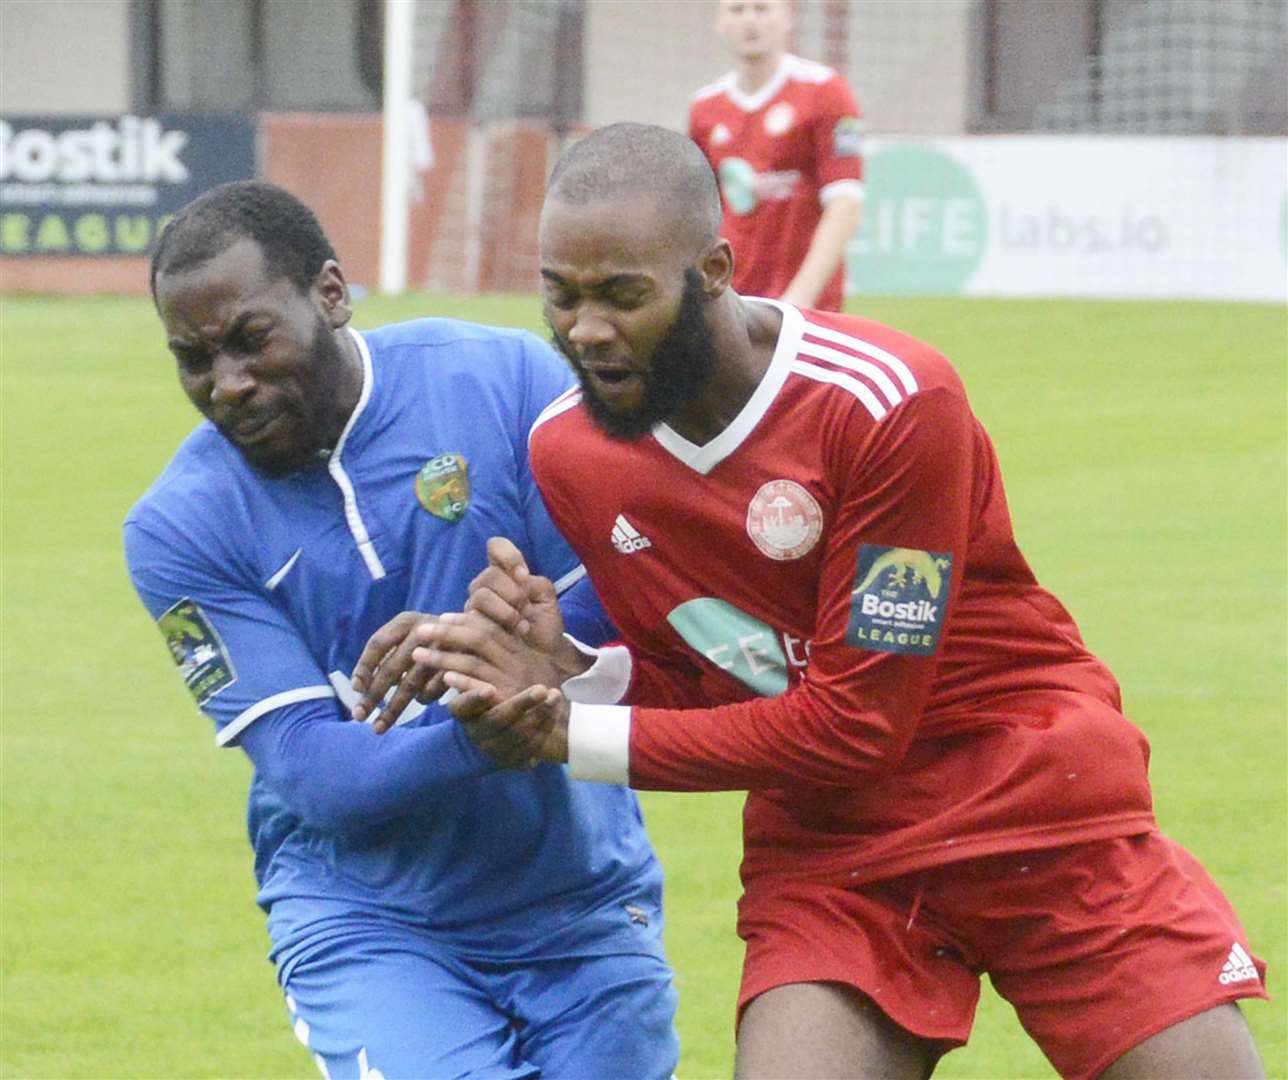 Zak Ansah, right, led Hythe to victory over VCD Picture: Paul Amos